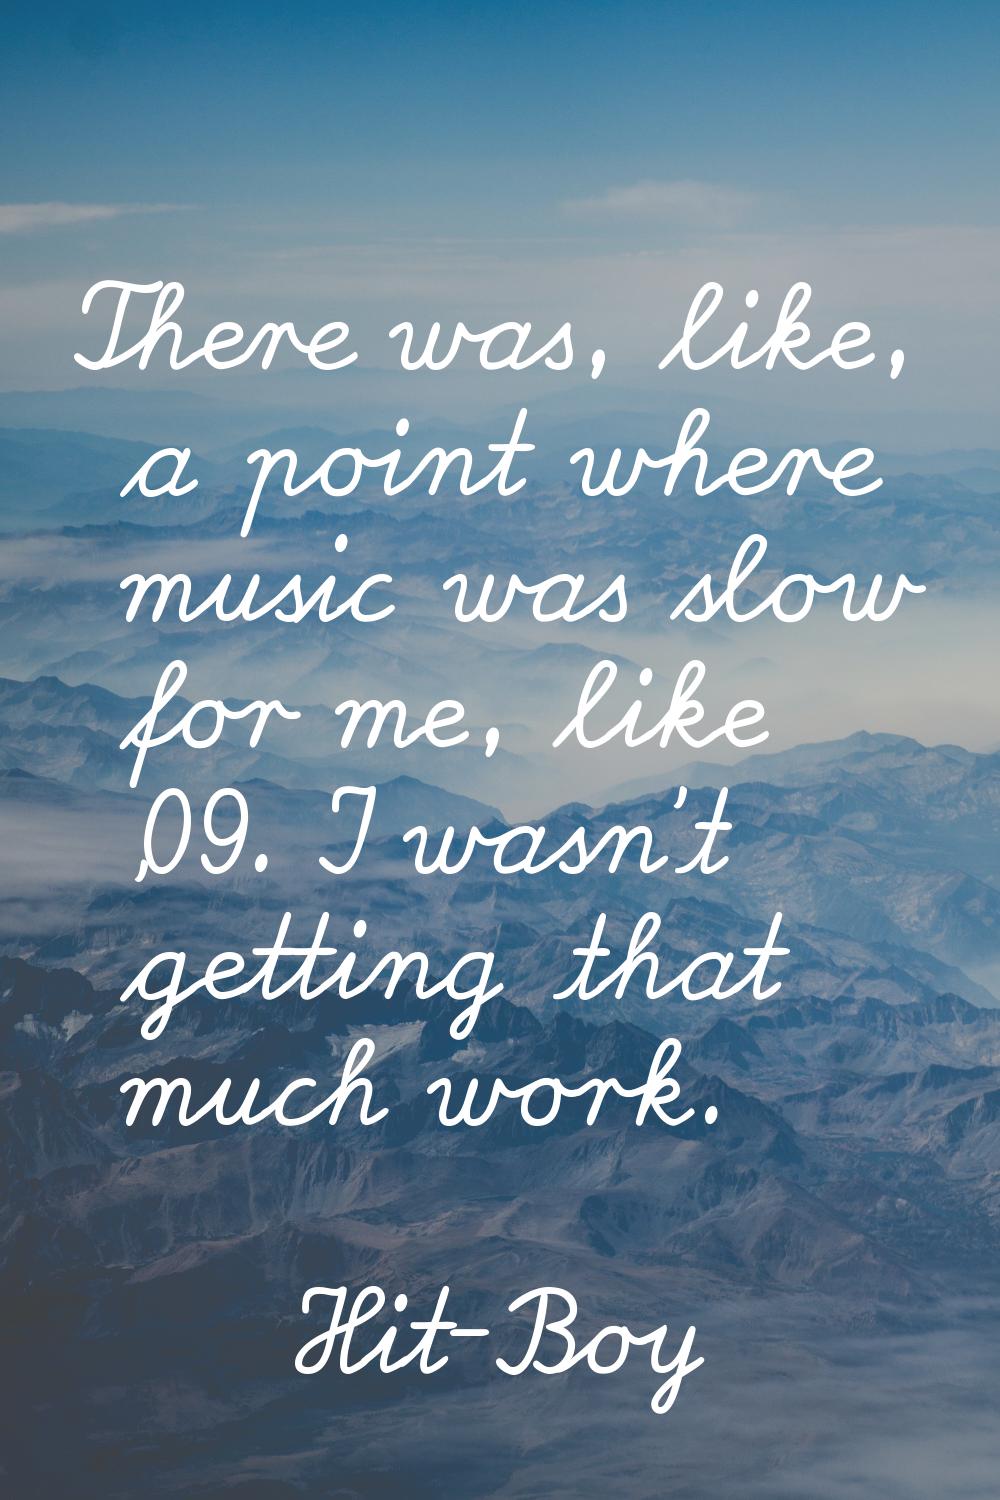 There was, like, a point where music was slow for me, like '09. I wasn't getting that much work.